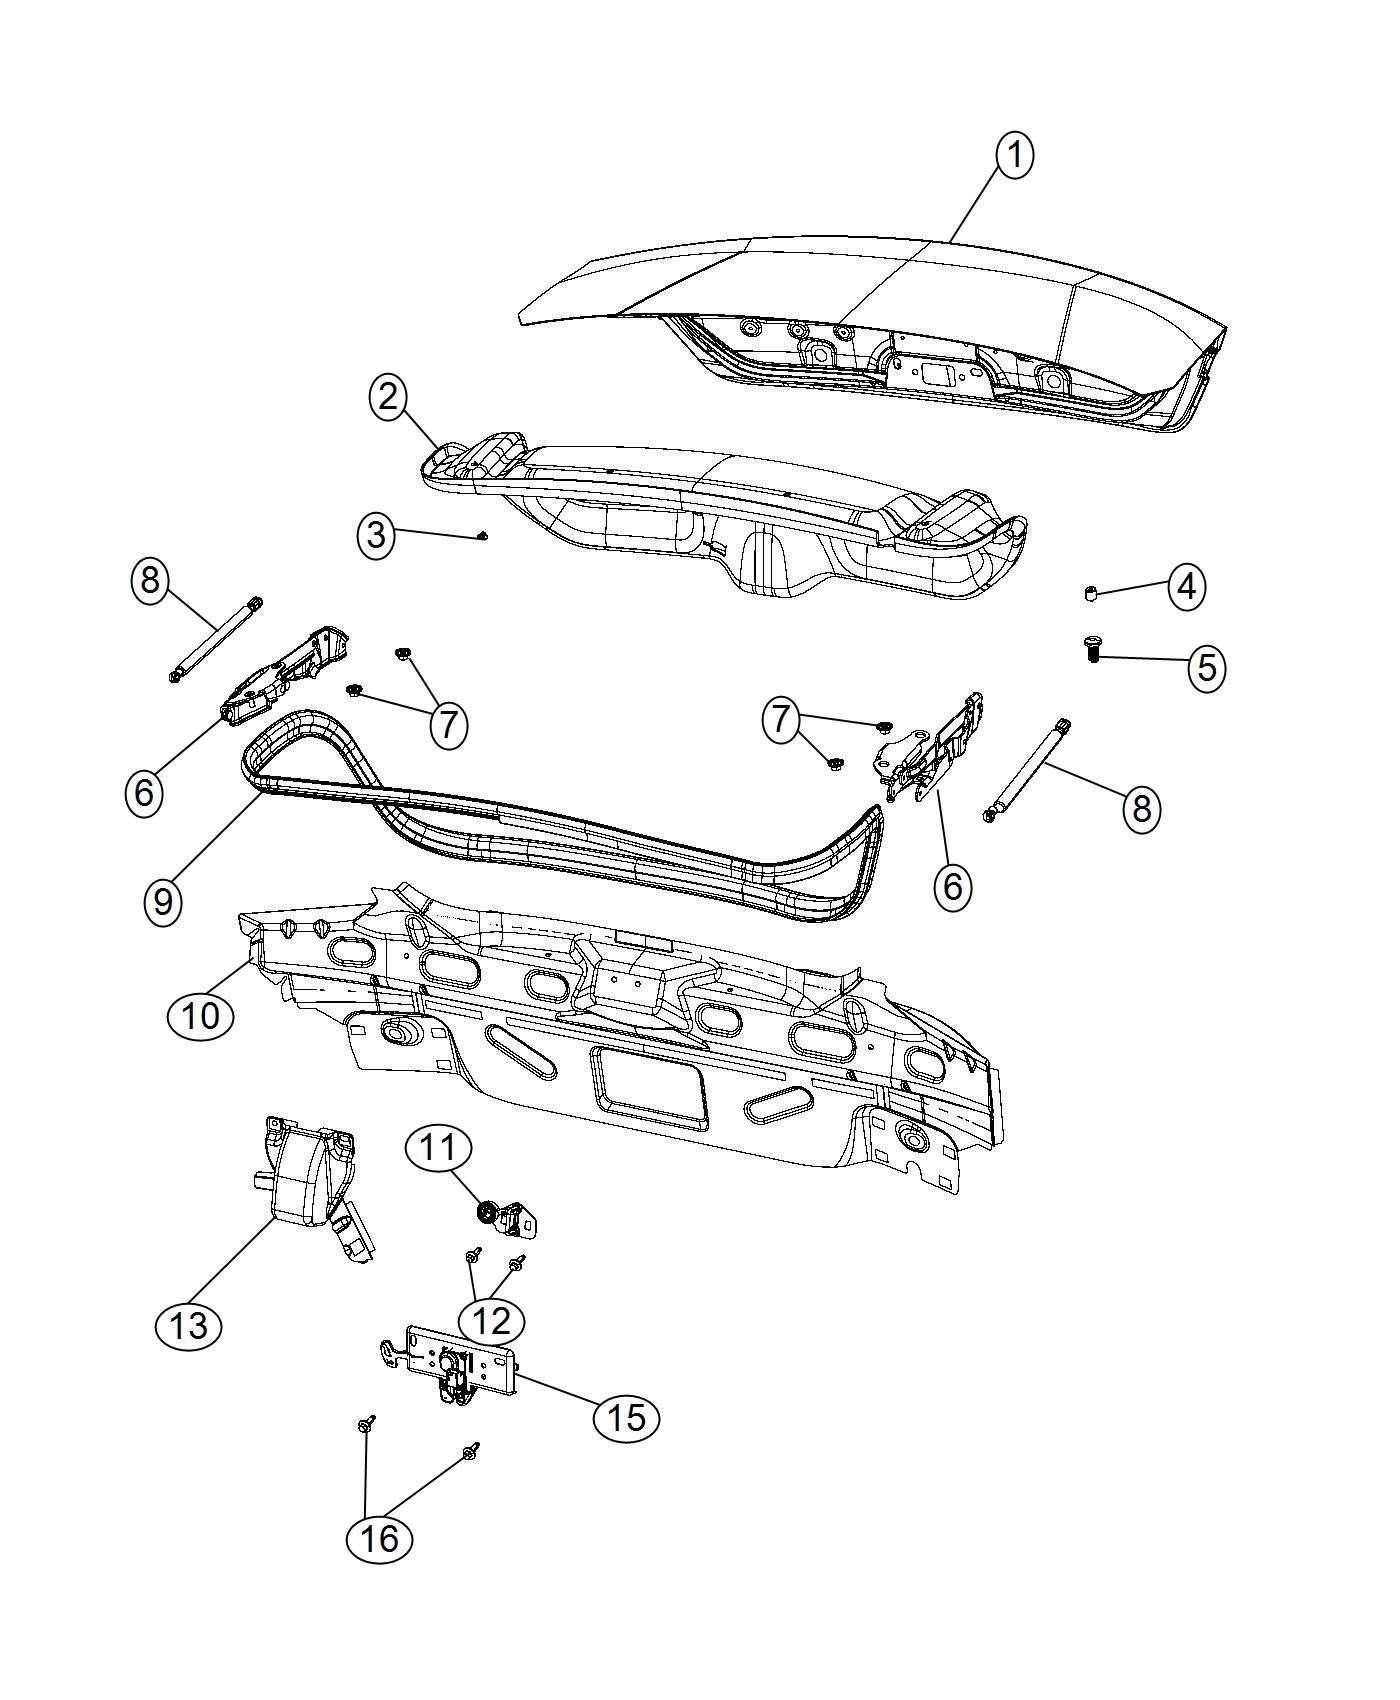 Deck Lid and Related Parts - C41 Body. Diagram